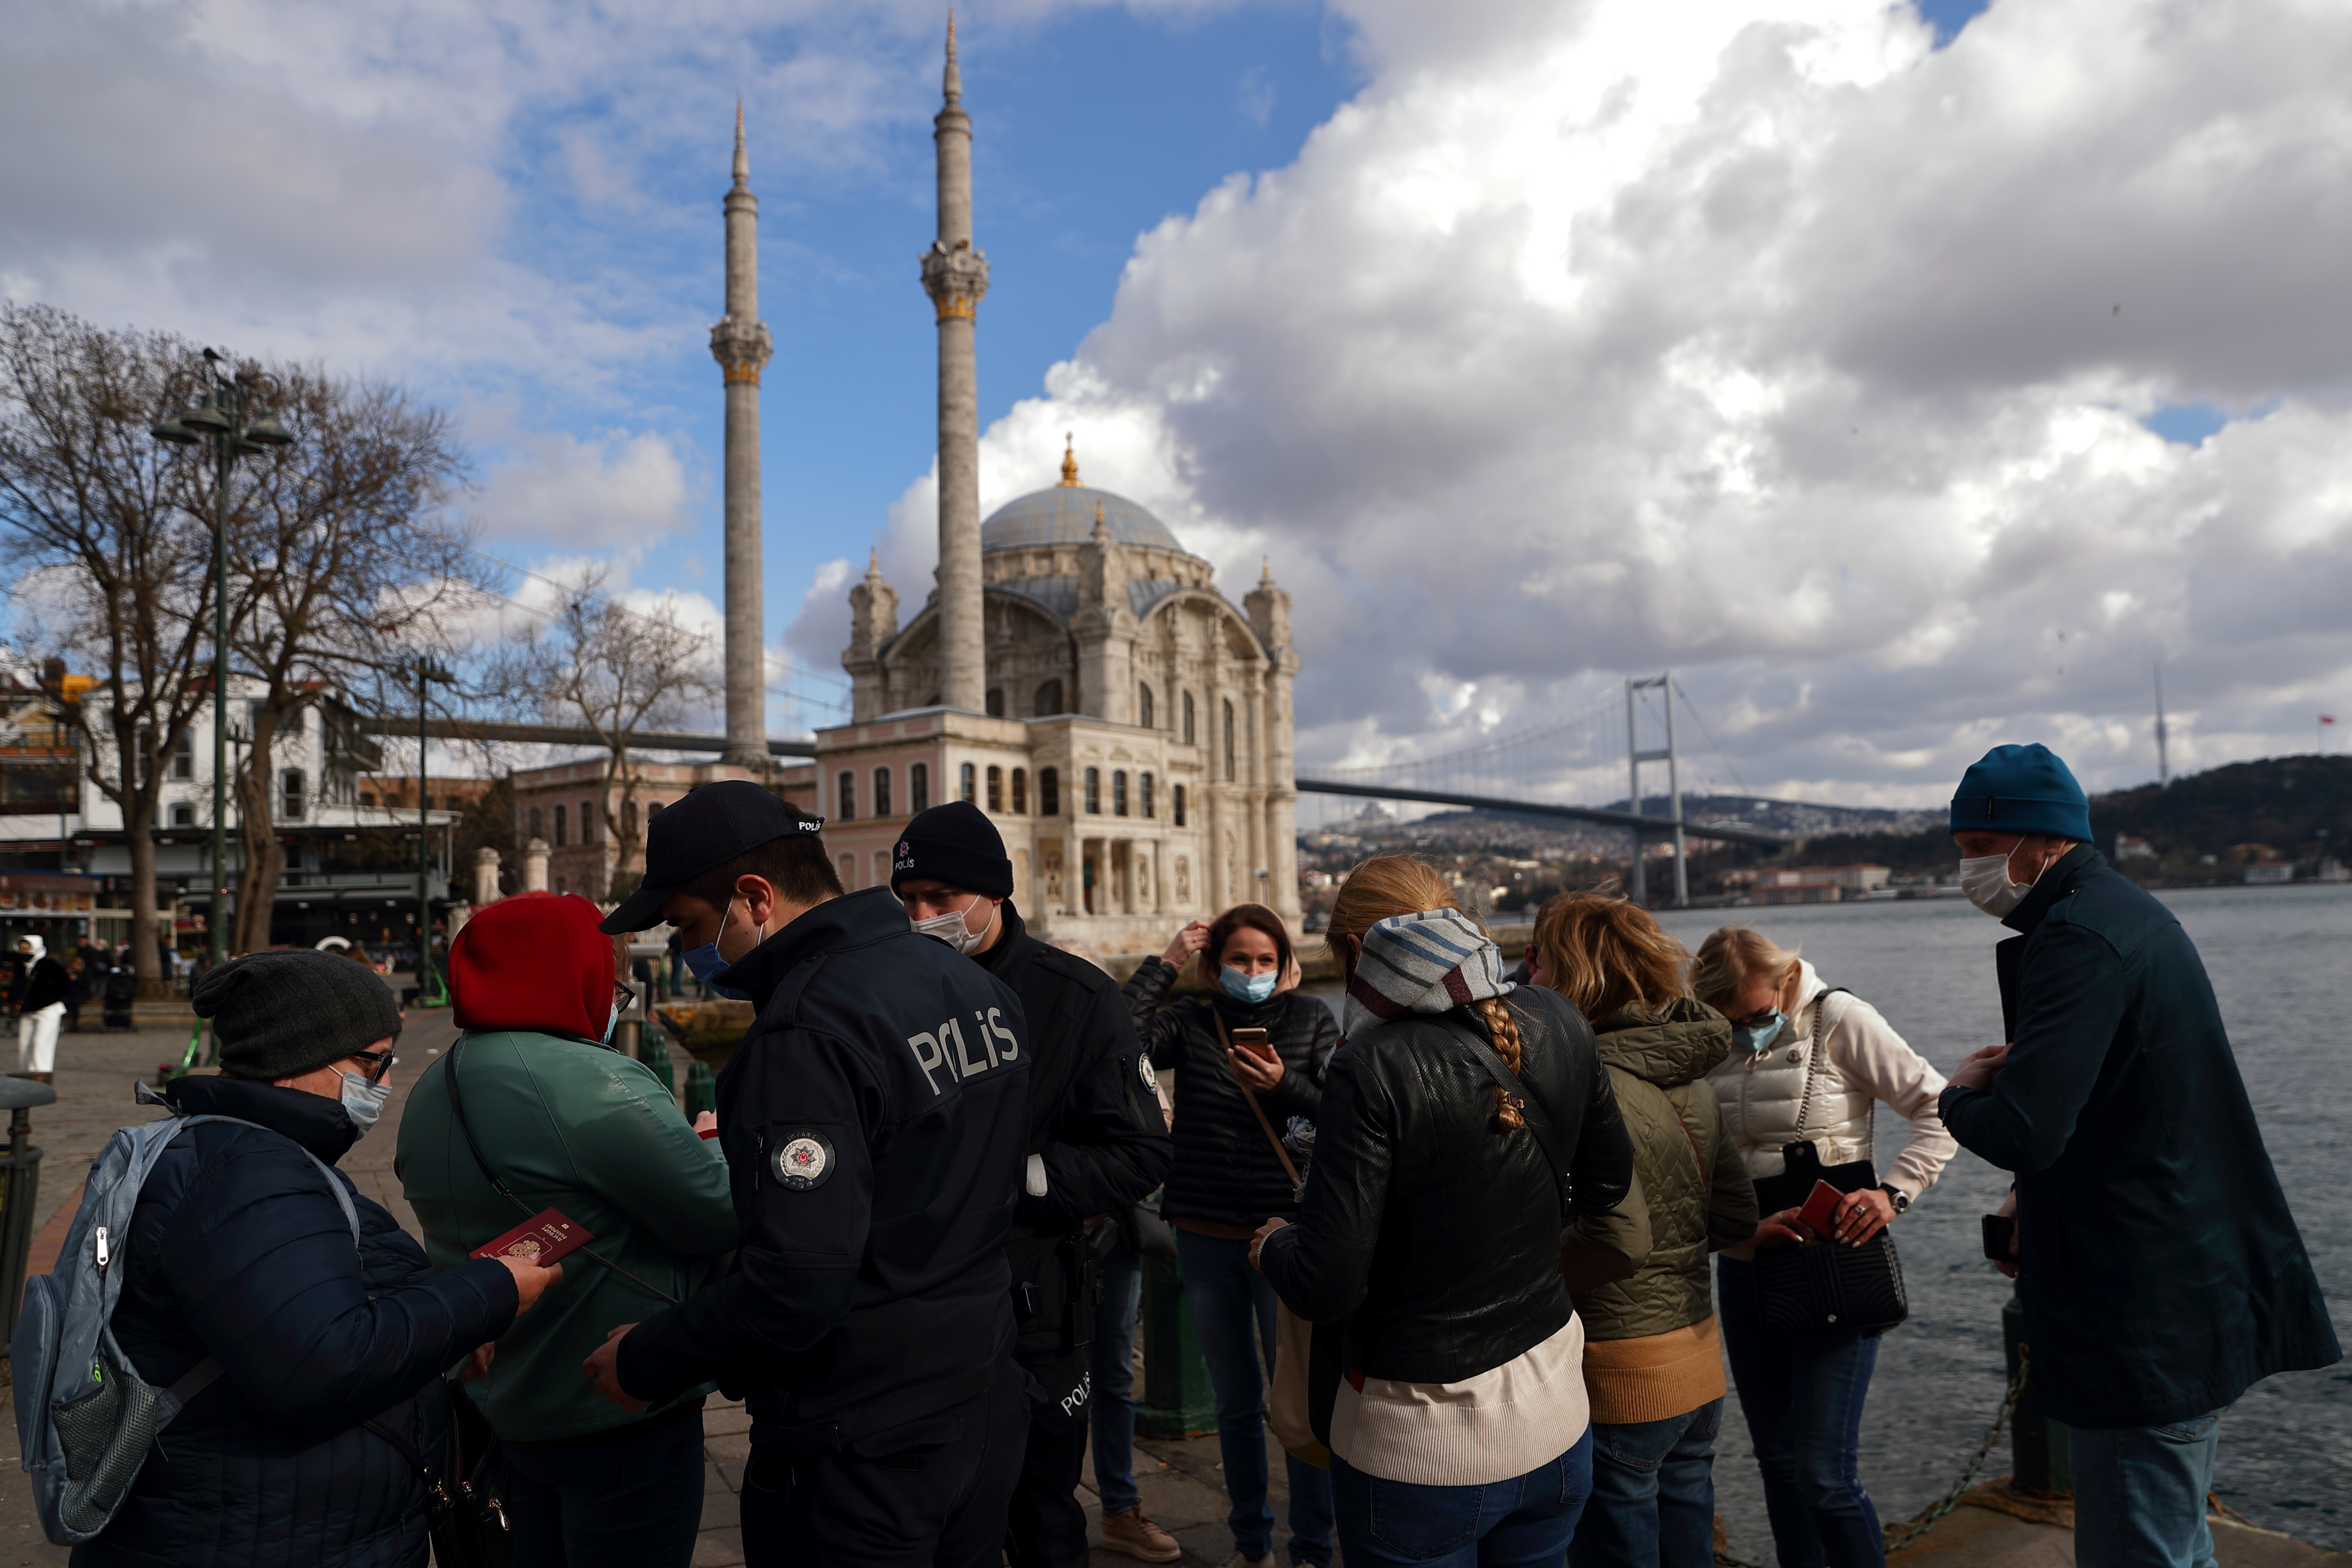 Turkish police officers check passports of a group of Russian tourists at Ortakoy square in Istanbul